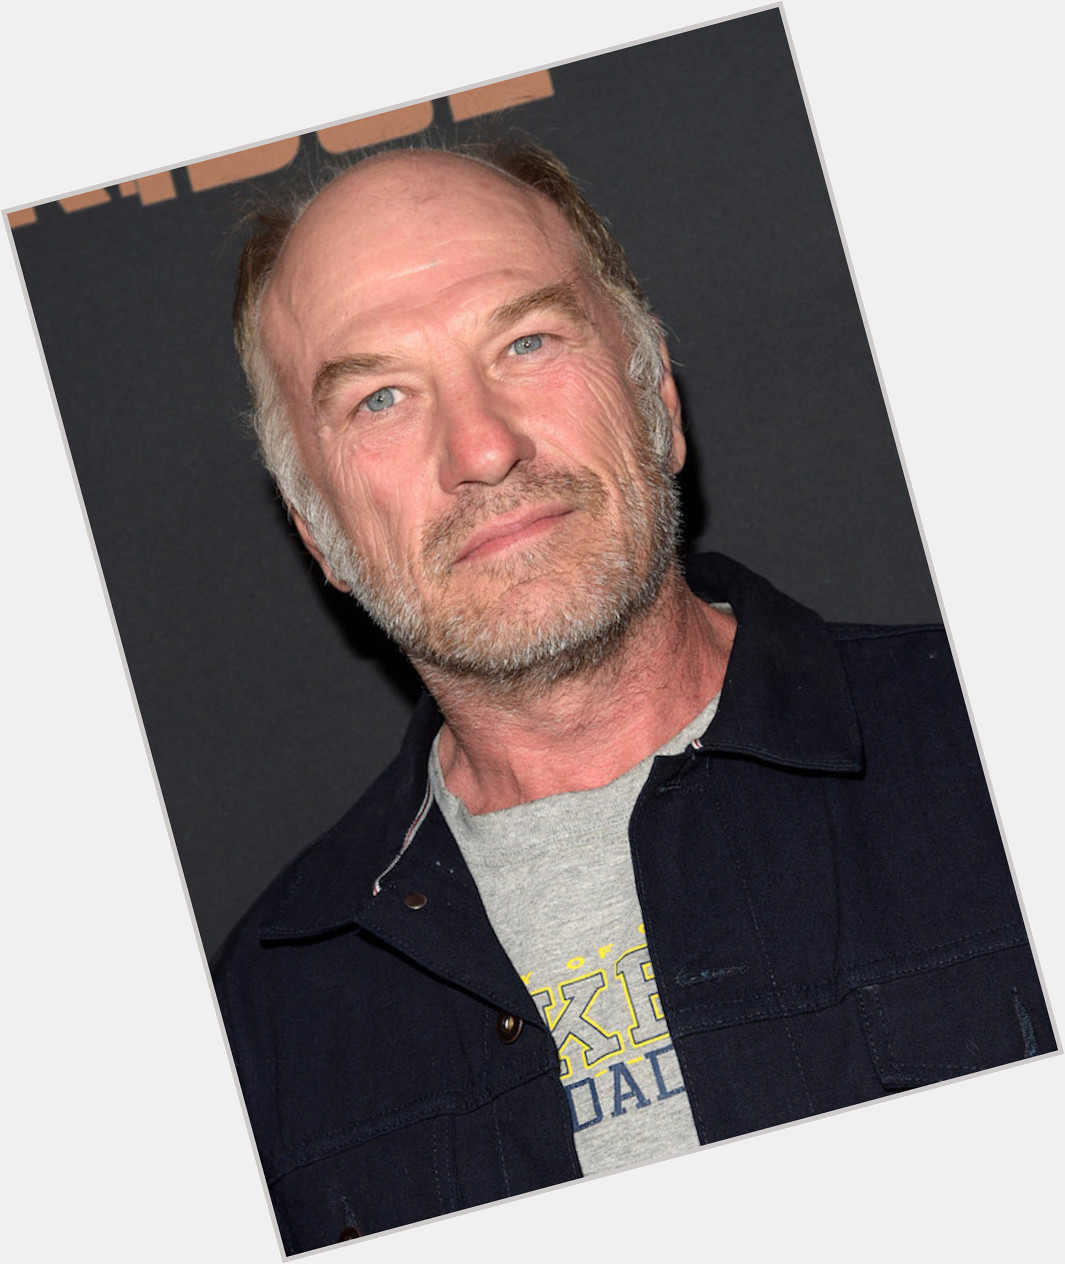 Happy Birthday, Ted Levine
For Disney, he portrayed Agent Wesson in the 1997 Disney comedy film, 